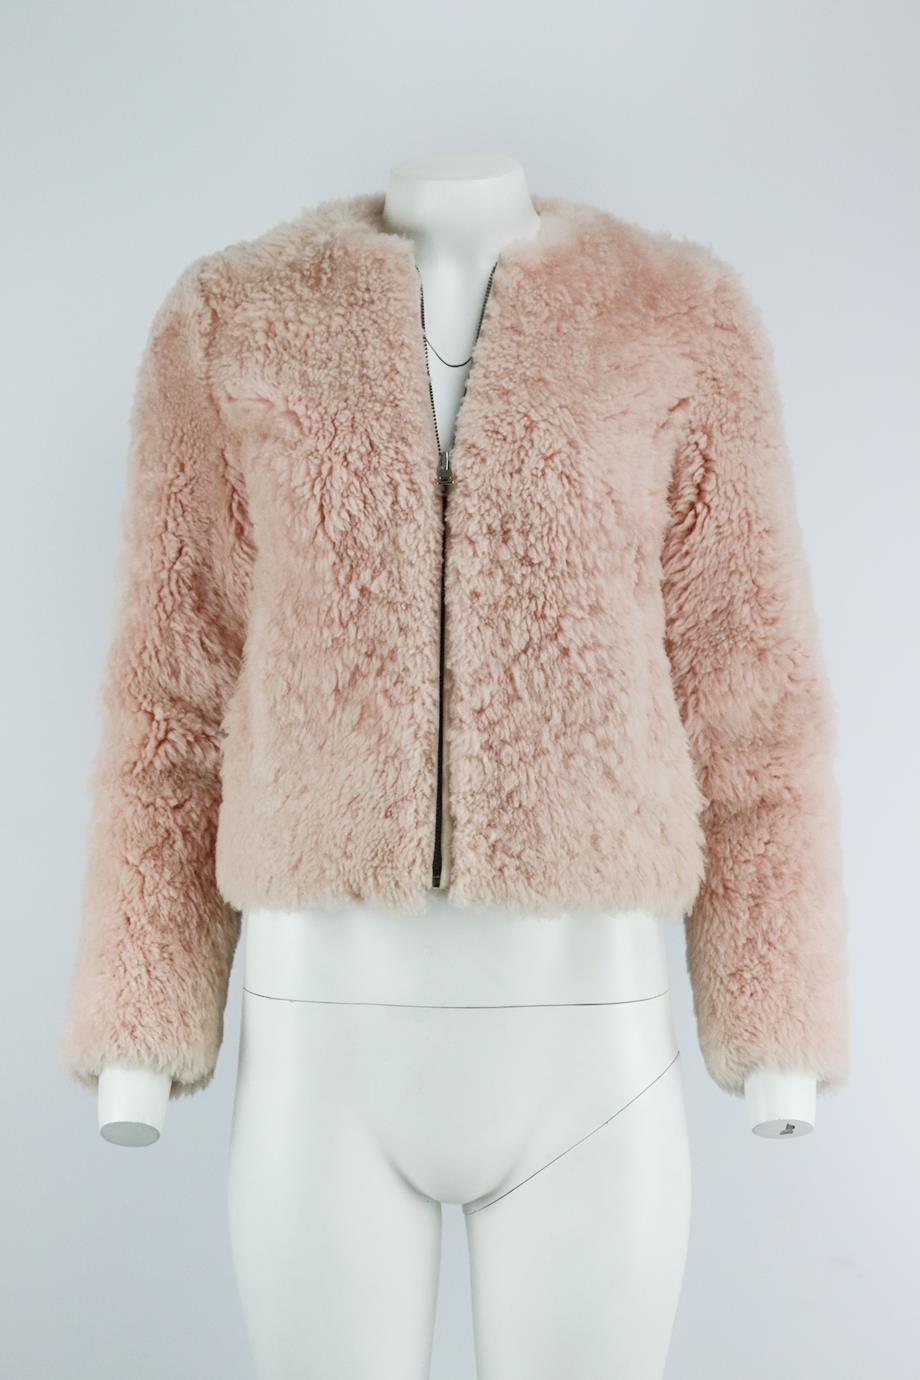 Intermix suede trimmed shearling jacket. Pink. Long sleeve, crewneck. Zip fastening at front. 100% Leather; lining: 100% polyester. Size: XSmall (UK 6, US 2, FR 34, IT 38). Shoulder to shoulder: 15 in. Bust: 35 in. Waist: 35 in. Hips: 36 in. Length: